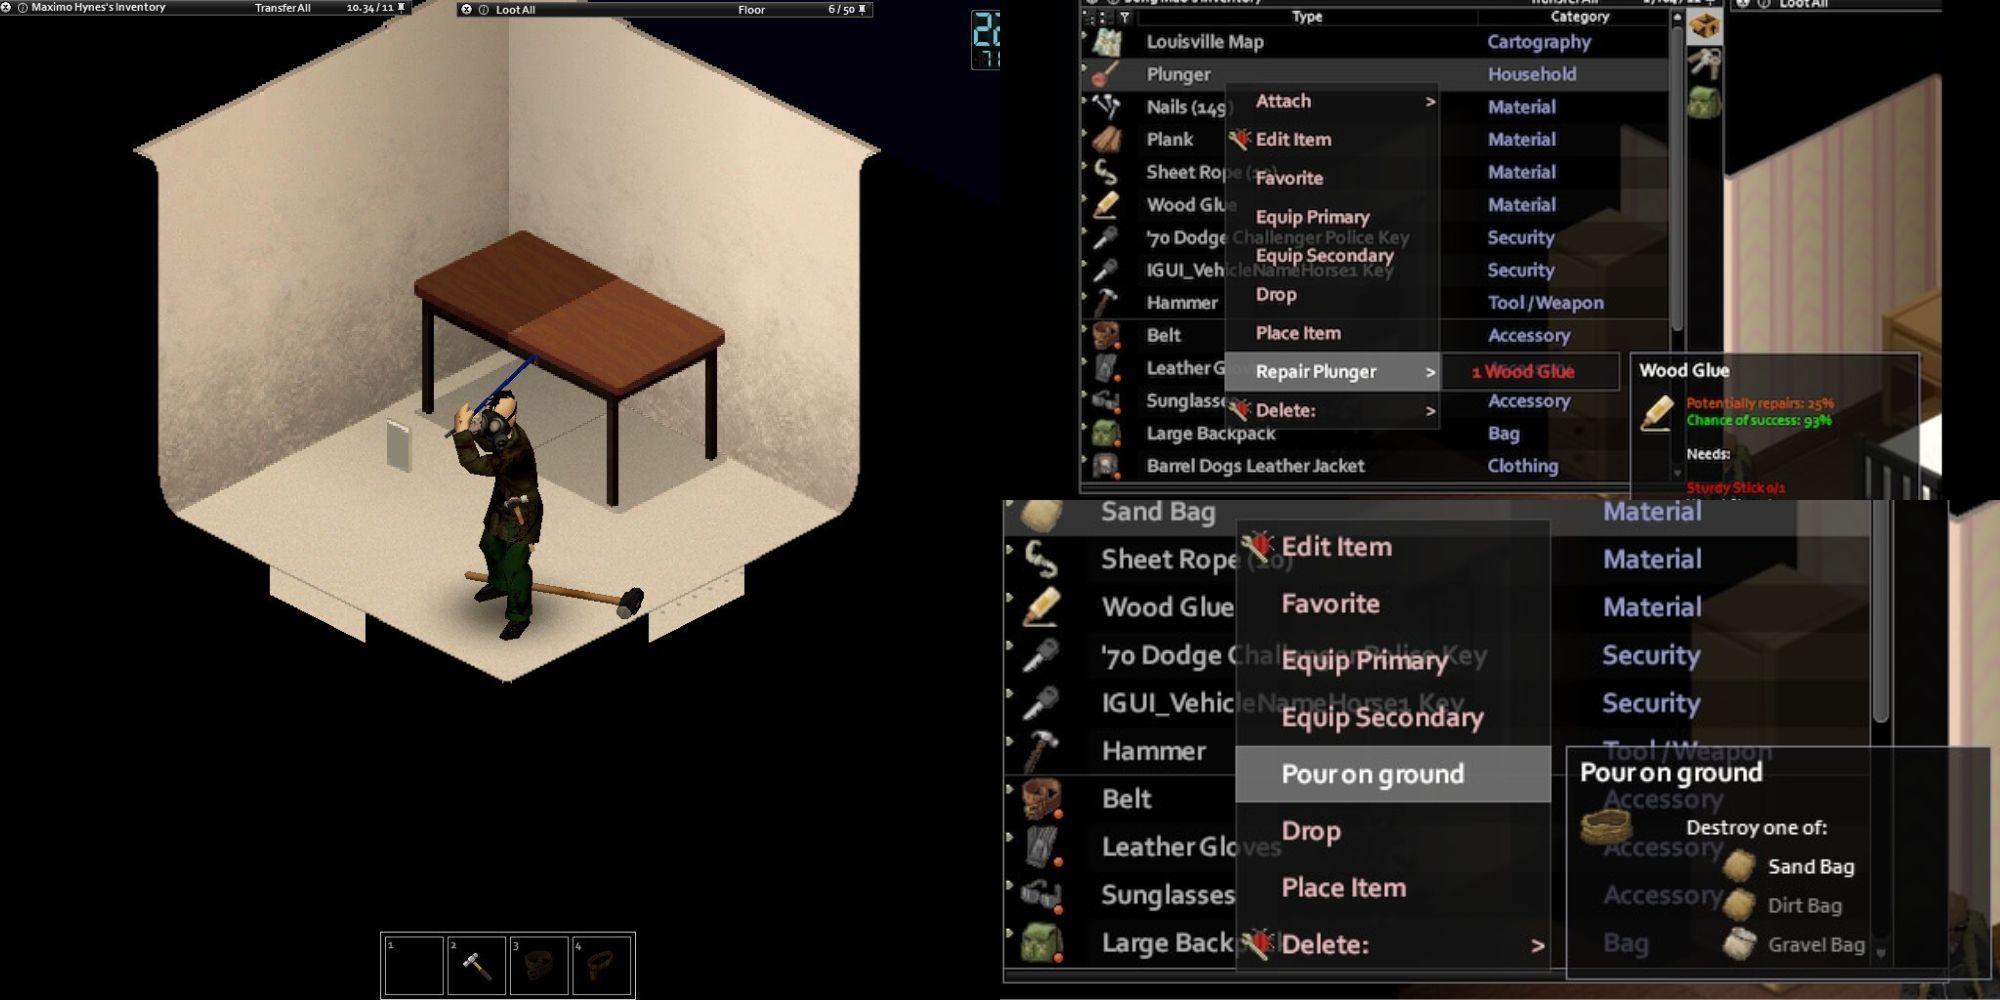 Left: A player with a black gas mask stands ready with a crowbar. Right: Complex information and UI.